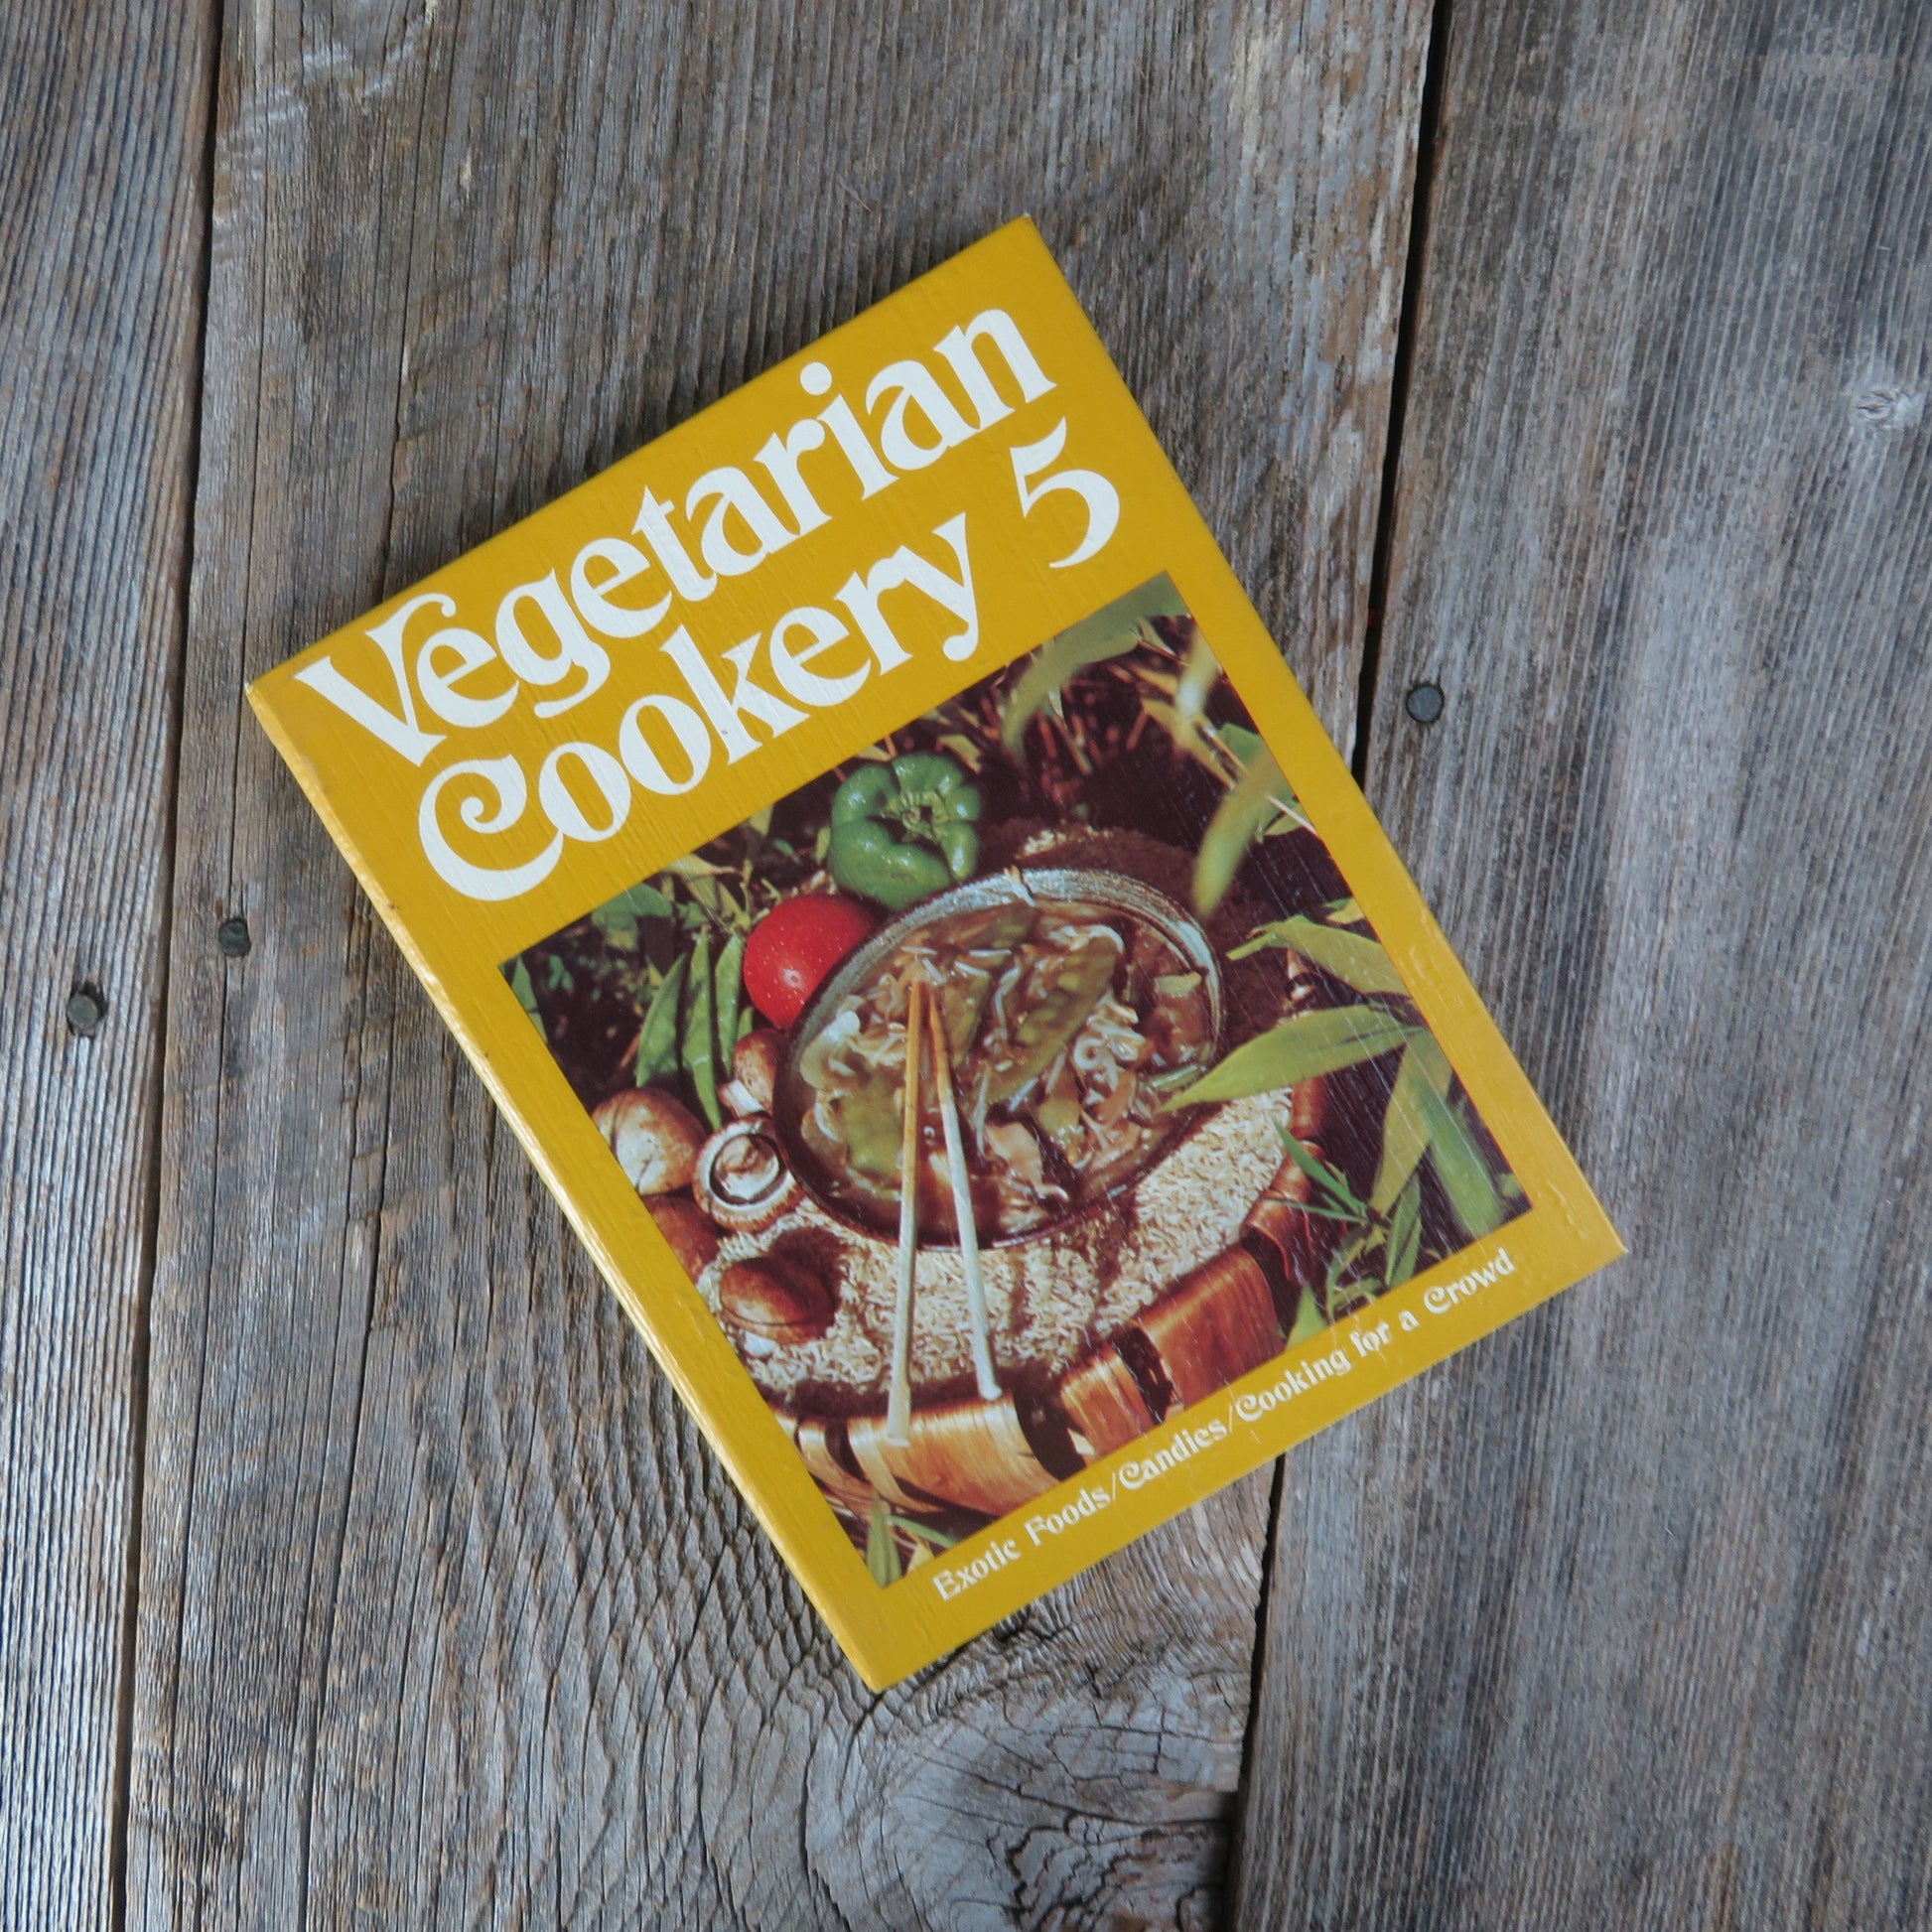 Vintage Vegetarian Cookery 5 Cookbook 1971 Vegetables Health Food Natural Carb Exotic Cooking for a Crowd - At Grandma's Table